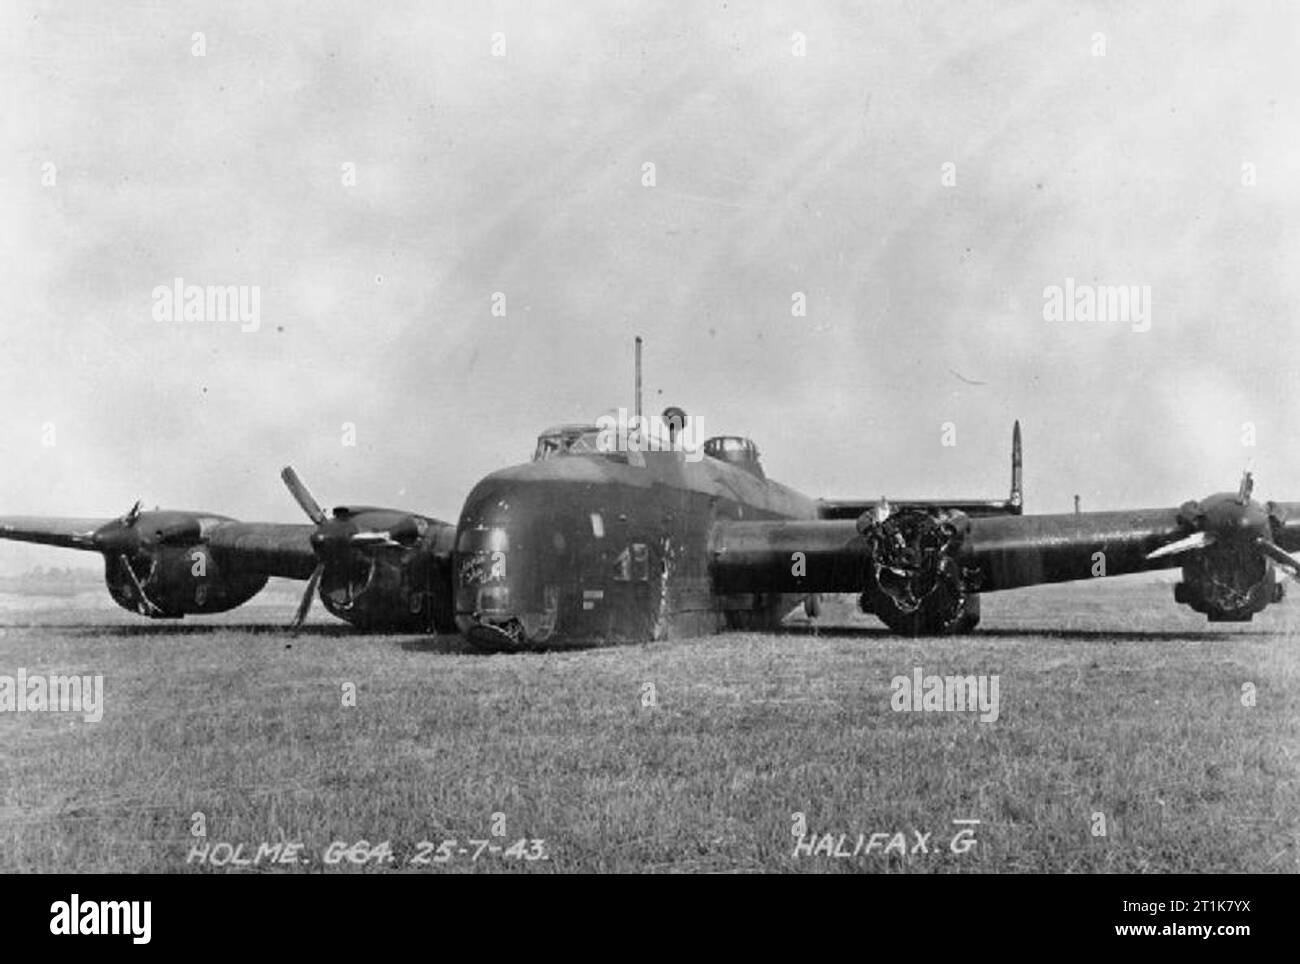 Royal Air Force Bomber Command, 1942-1945. Handley Page Halifax B Mark II Series I (Special), DK148 'MP-G' 'Johnnie the Wolf', of No. 76 Squadron RAF rests at Holme-on-Spalding Moor, Yorkshire, after crash-landing on return from an operation to Essen on the night of 25/26 July 1943. The propeller from the damaged port-inner engine flew off shortly after the bombing run, tearing a large hole in the fuselage. The mid-upper gunner immediately baled out, but the pilot, Flight Lieutenant C M Shannon, regained control of the aircraft and managed to bring the rest of the crew back to Holme, although Stock Photo